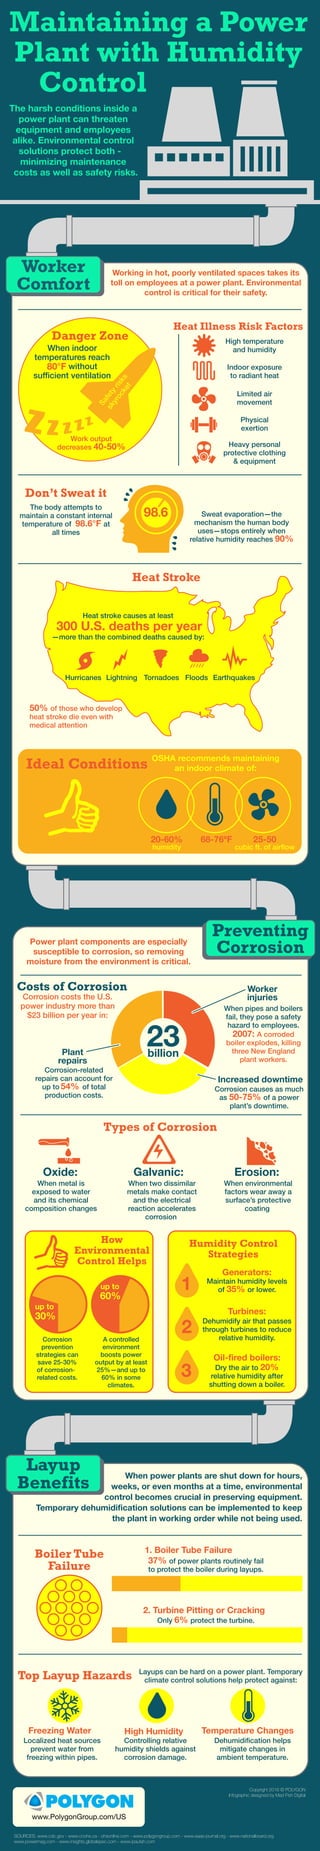 Copyright 2016 © POLYGON
Infographic designed by Mad Fish Digital
Power plant components are especially
susceptible to corrosion, so removing
moisture from the environment is critical.
Costs of Corrosion
54%
Corrosion-related
repairs can account for
up to of total
production costs.
Corrosion causes as much
as 50-75% of a power
plant’s downtime.
When pipes and boilers
fail, they pose a safety
hazard to employees.
2007: A corroded
boiler explodes, killing
three New England
plant workers.
The harsh conditions inside a
power plant can threaten
equipment and employees
alike. Environmental control
solutions protect both -
minimizing maintenance
costs as well as safety risks.
Maintaining a Power
Plant with Humidity
Control
When power plants are shut down for hours,
weeks, or even months at a time, environmental
control becomes crucial in preserving equipment.
Temporary dehumidification solutions can be implemented to keep
the plant in working order while not being used.
Boiler Tube
Failure
1. Boiler Tube Failure
37% of power plants routinely fail
to protect the boiler during layups.
2. Turbine Pitting or Cracking
6%Only protect the turbine.
50% of those who develop
heat stroke die even with
medical attention
Types of Corrosion
Increased downtime
Heat Illness Risk Factors
High temperature
and humidity
Indoor exposure
to radiant heat
Limited air
movement
Physical
exertion
Heavy personal
protective clothing
& equipment
Worker
Comfort
Working in hot, poorly ventilated spaces takes its
toll on employees at a power plant. Environmental
control is critical for their safety.
Preventing
Corrosion
Danger Zone
80°F
When indoor
temperatures reach
without
sufficient ventilation
Work output
decreases 40-50%
Don’t Sweat it
98.6°F
The body attempts to
maintain a constant internal
temperature of at
all times
Sweat evaporation—the
mechanism the human body
uses—stops entirely when
relative humidity reaches 90%
Heat Stroke
Heat stroke causes at least
300 U.S. deaths per year
—more than the combined deaths caused by:
Hurricanes Lightning Tornadoes Floods Earthquakes
Ideal Conditions
OSHA recommends maintaining
an indoor climate of:
68-76ºF20-60%
humidity
25-50
cubic ft. of airflow
Corrosion costs the U.S.
power industry more than
$23 billion per year in:
Generators:
Turbines:
Oil-fired boilers:
35%
Maintain humidity levels
of or lower.
Dehumidify air that passes
through turbines to reduce
relative humidity.
20%Dry the air to
relative humidity after
shutting down a boiler.
How
Environmental
Control Helps
-
Corrosion
prevention
strategies can
save 25-30%
of corrosion
related costs.
A controlled
environment
boosts power
output by at least
25%—and up to
60% in some
climates.
30%
up to
60%
up to
Humidity Control
Strategies
SOURCES: www.cdc.gov - www.ccohs.ca - ohsonline.com - www.polygongroup.com - www.eaas-journal.org - www.nationalboard.org
www.powermag.com - www.insights.globalspec.com - www.ipautah.com
98.6
Top Layup Hazards
Localized heat sources
prevent water from
freezing within pipes.
Layups can be hard on a power plant. Temporary
climate control solutions help protect against:
Freezing Water High Humidity Temperature Changes
Controlling relative
humidity shields against
corrosion damage.
Dehumidification helps
mitigate changes in
ambient temperature.
Layup
Benefits
23billion
1
2
3
Oxide: Galvanic:
When metal is
exposed to water
and its chemical
composition changes
When two dissimilar
metals make contact
and the electrical
reaction accelerates
corrosion
When environmental
factors wear away a
surface’s protective
coating
Erosion:
 